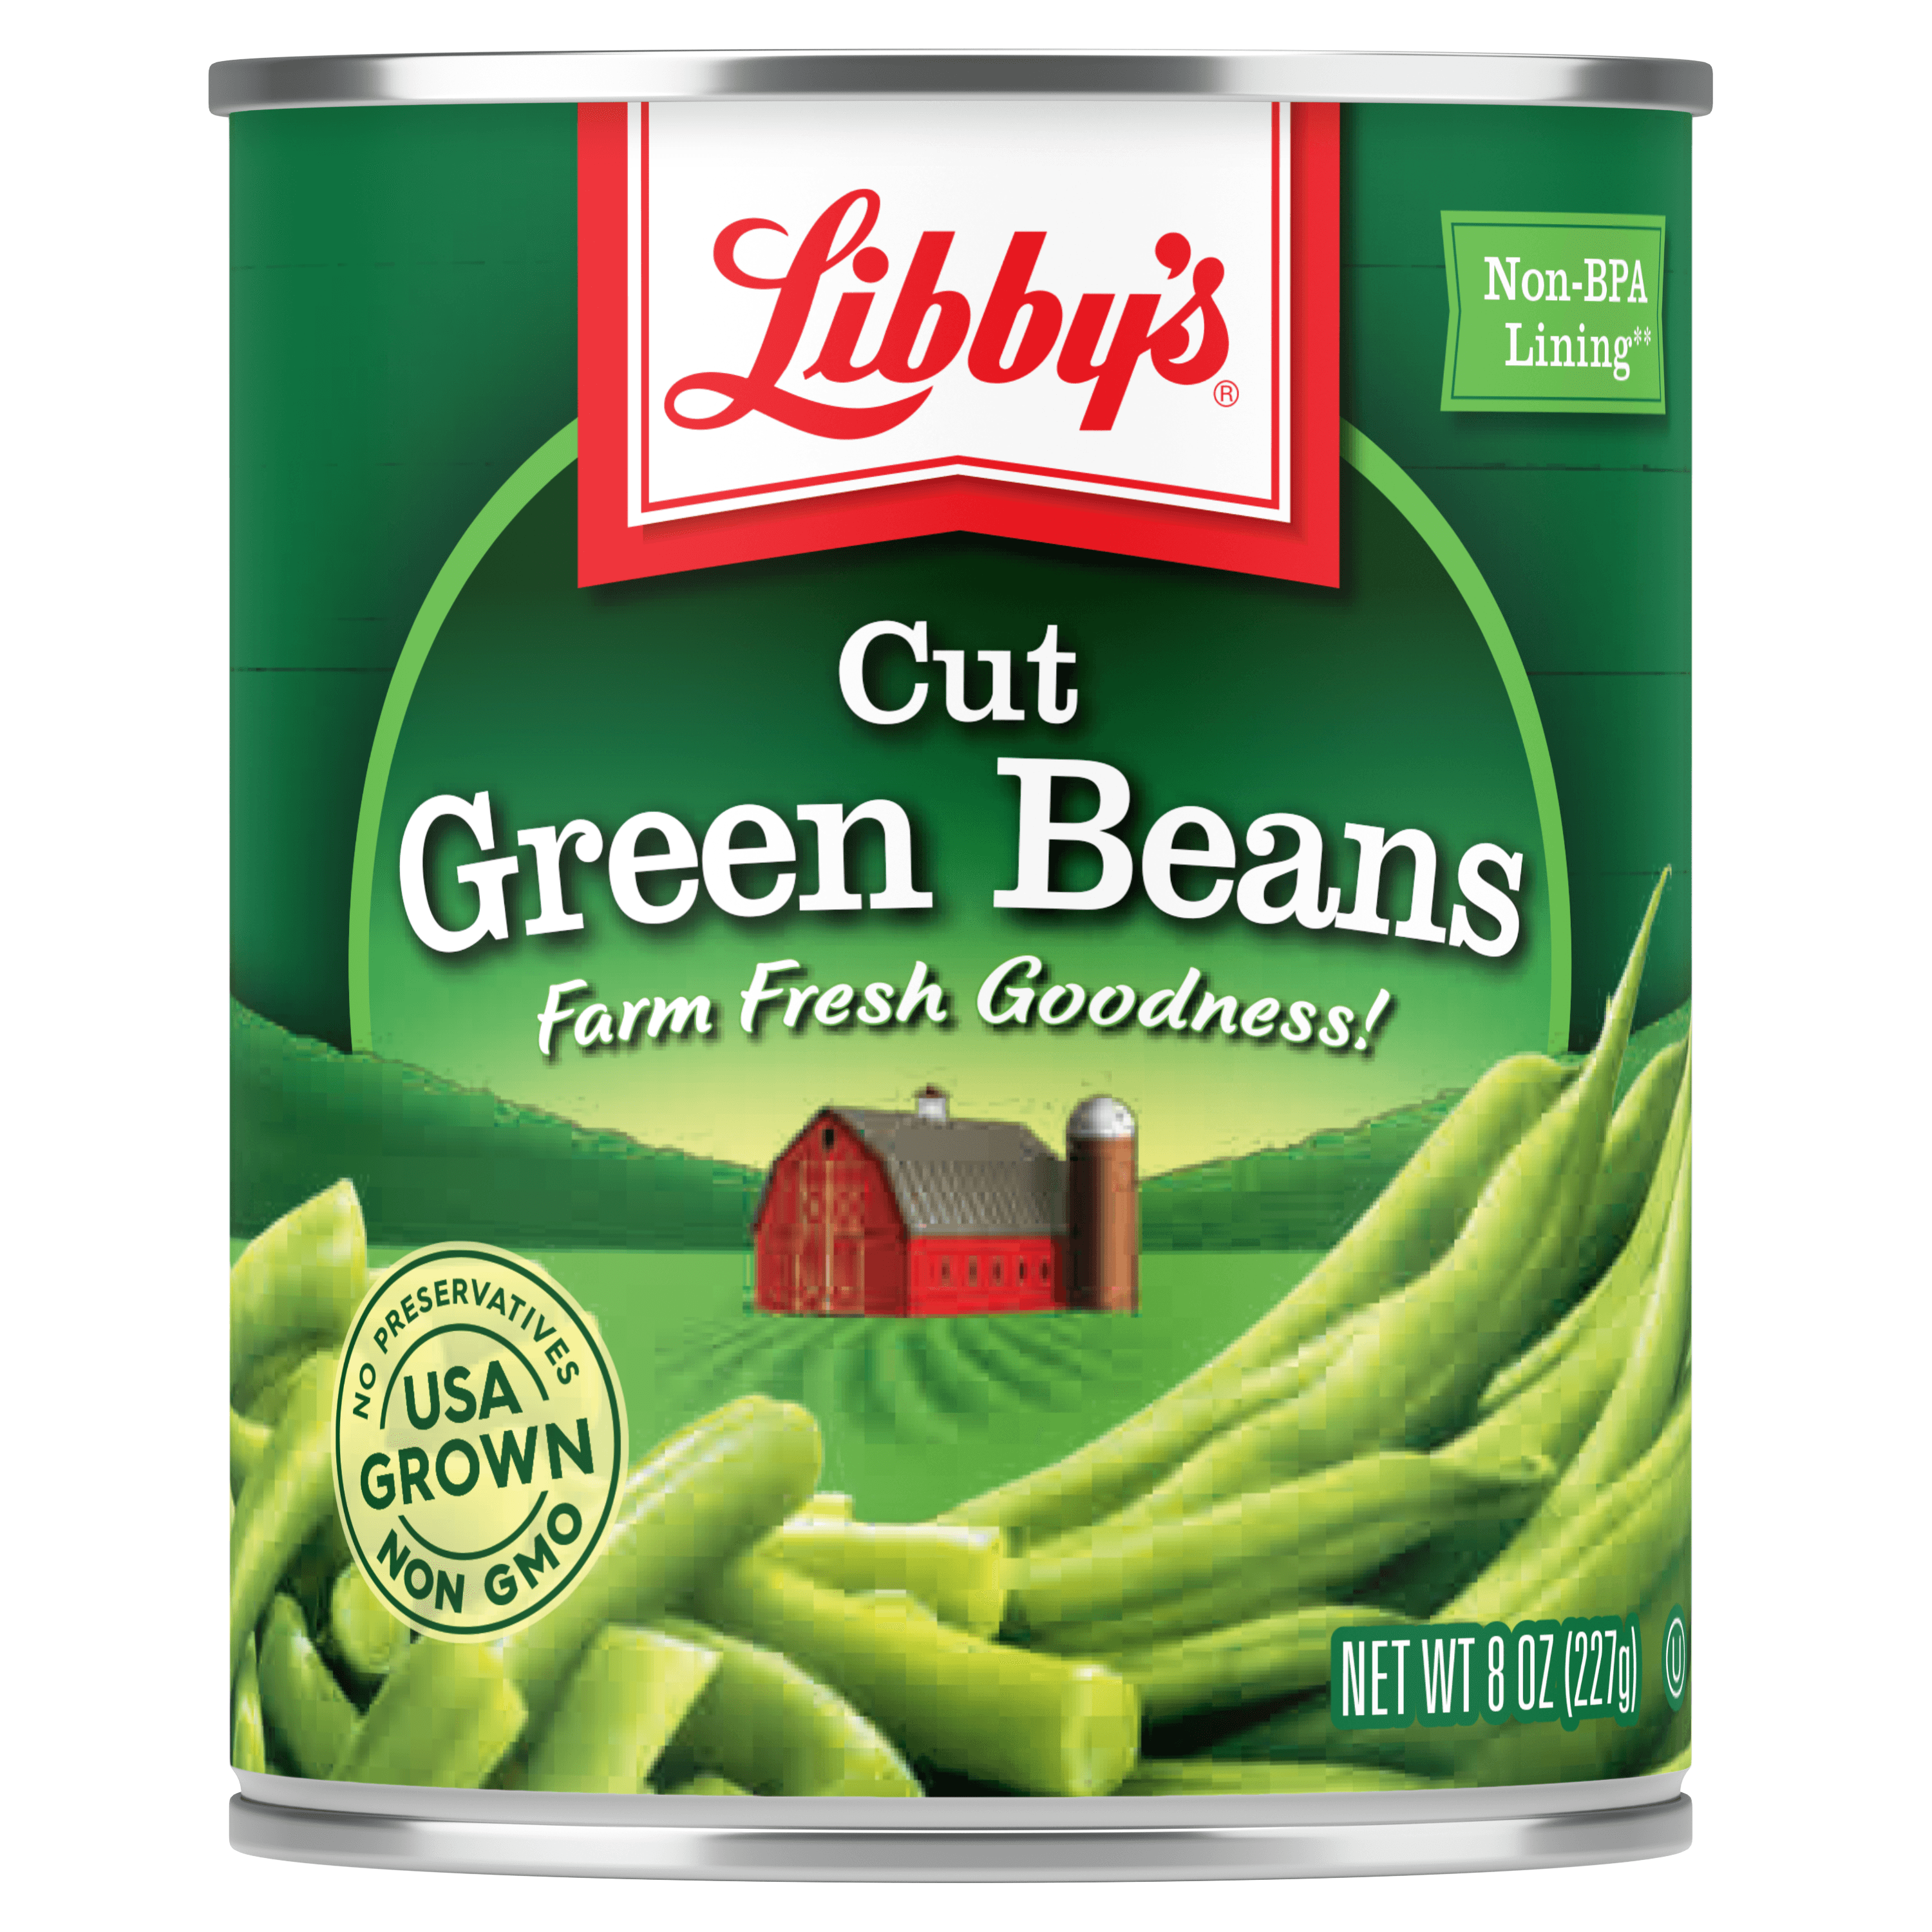 Libby's Cut Green Beans, Canned Green Beans, 8 oz. Can